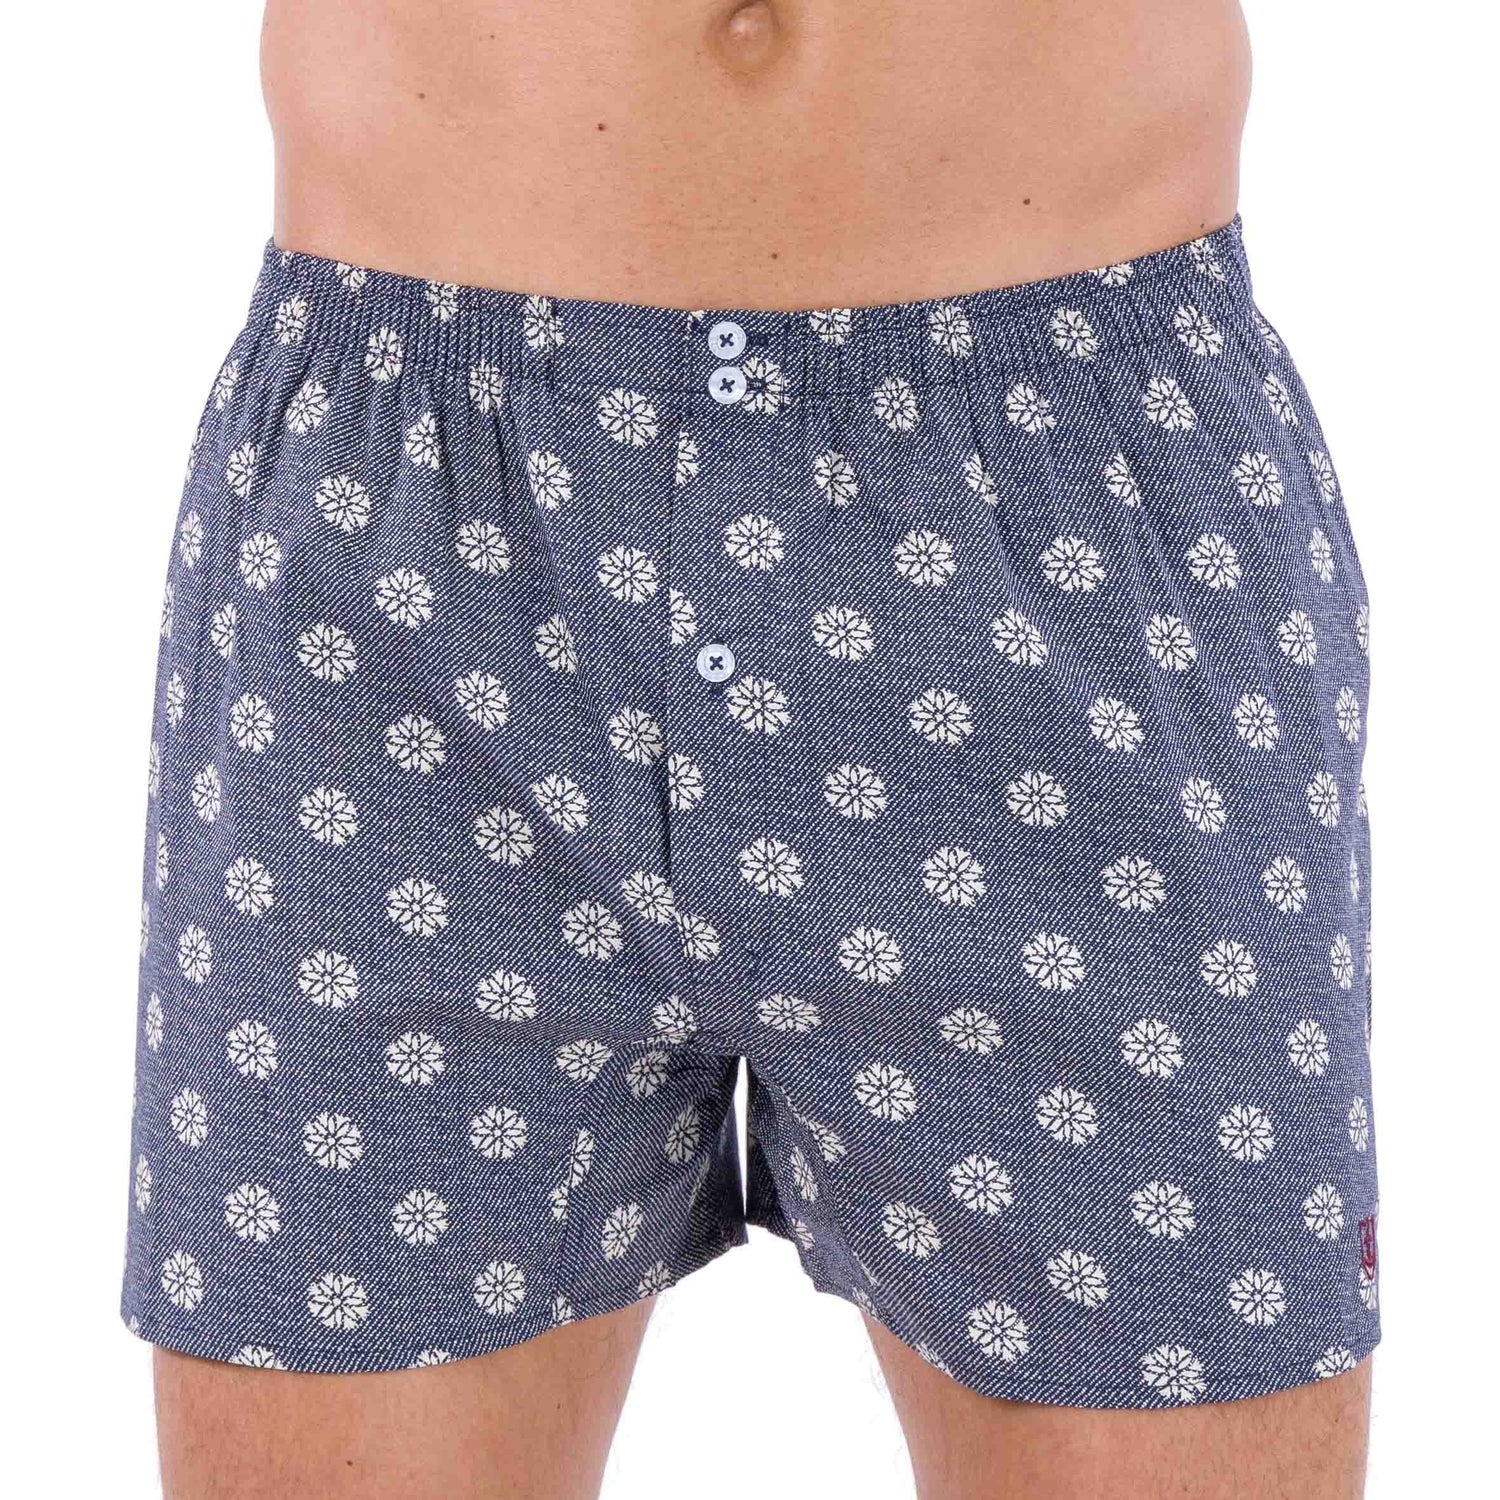 Boxer shorts with inner briefs in Pure Cotton Poplin printed Navy FLORAL